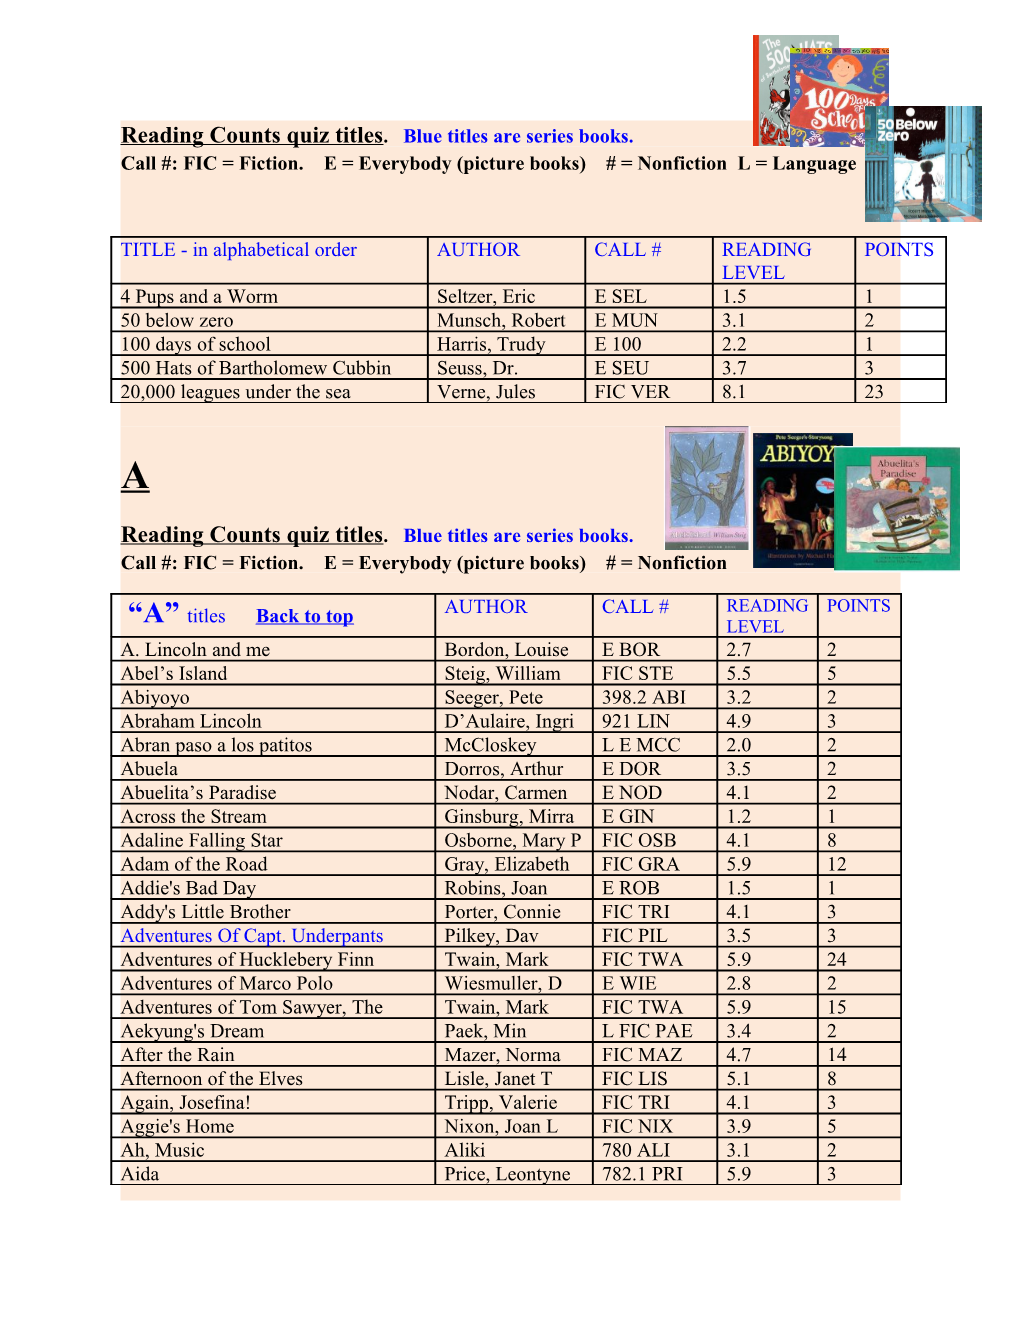 Reading Counts Quiz Titles. Blue Titles Are Series Books. Call #: FIC = Fiction. E = Everybody